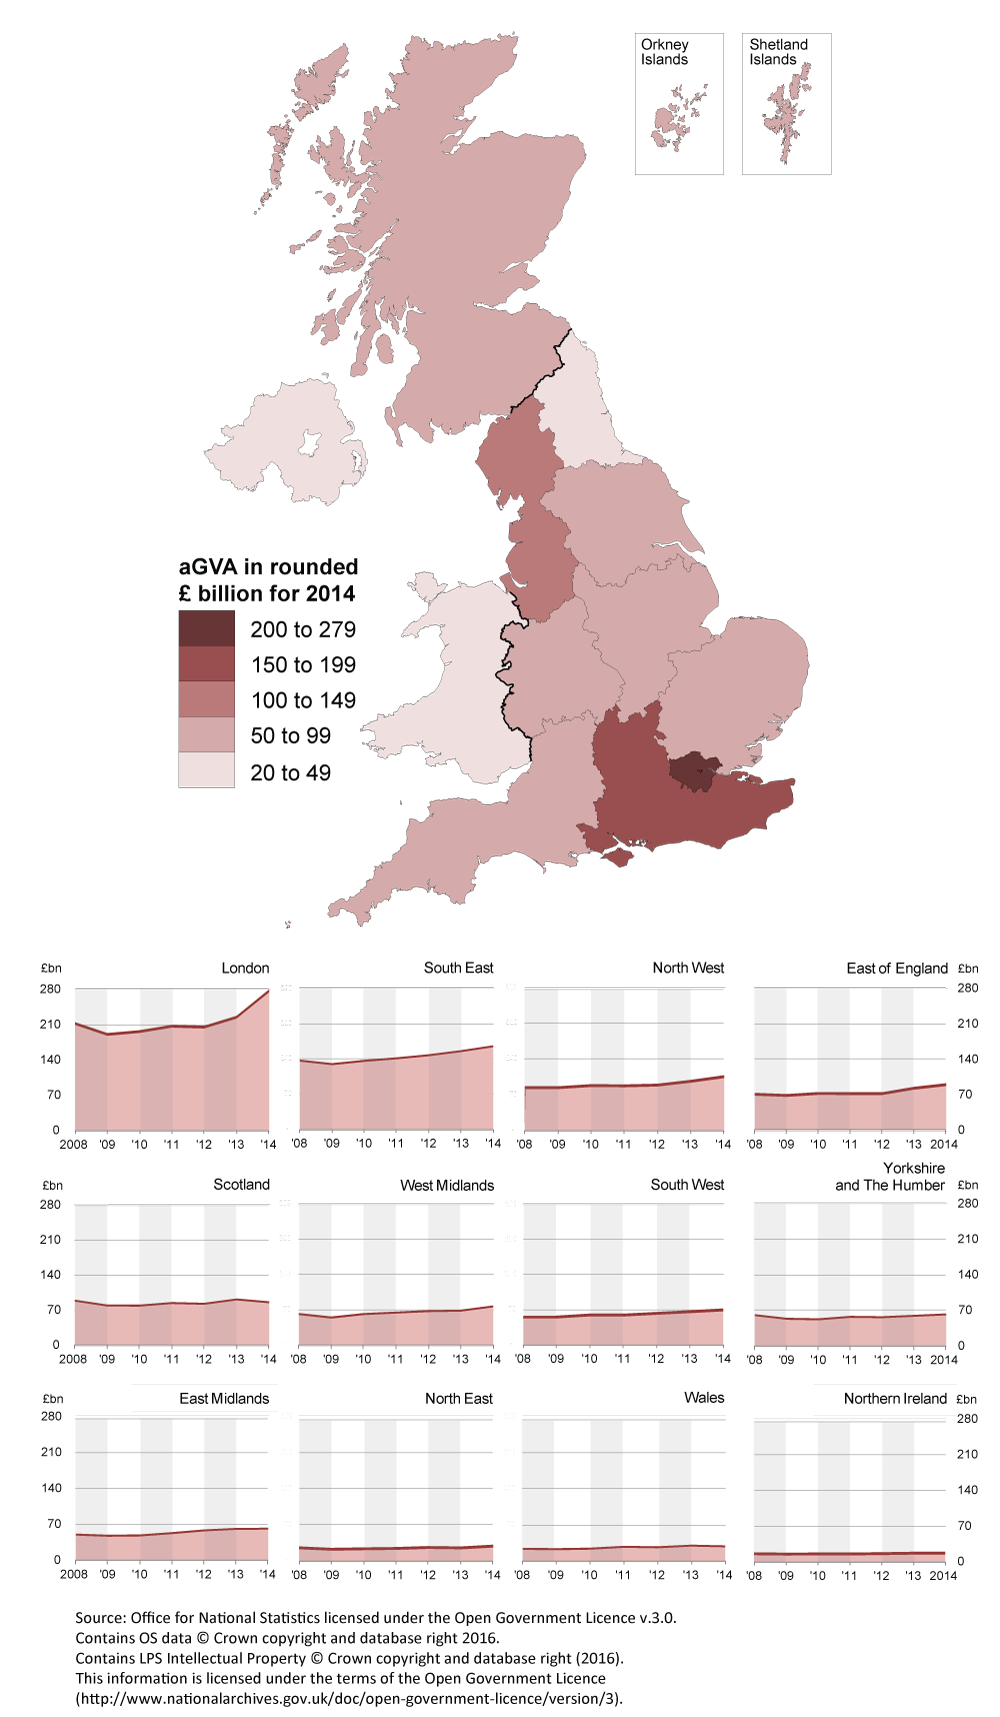 London is the largest region in terms of aGVA contribution in 2014.